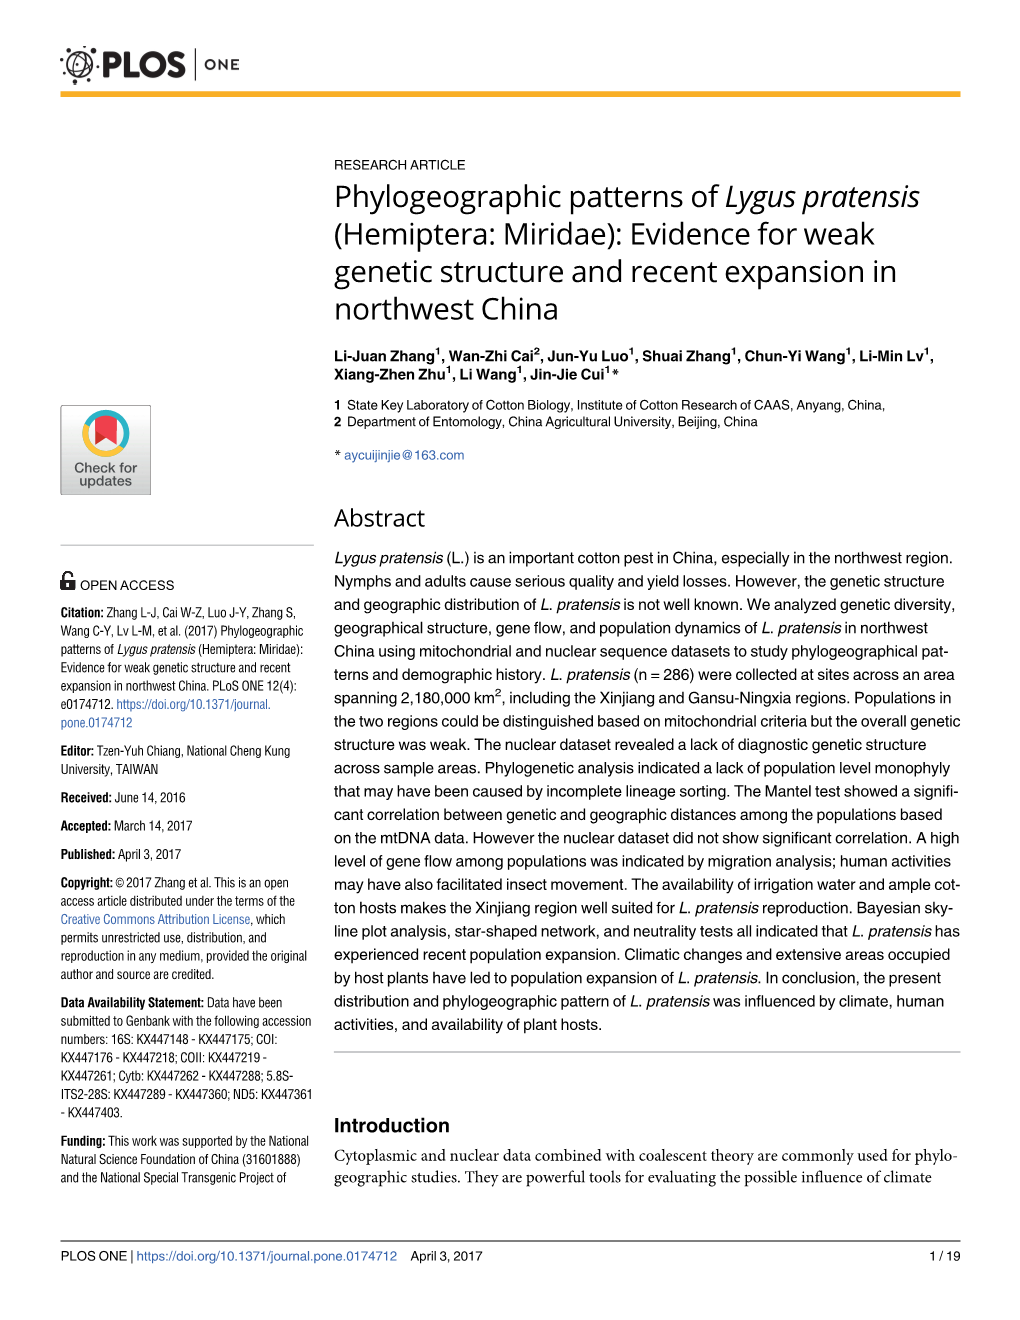 Phylogeographic Patterns of Lygus Pratensis (Hemiptera: Miridae): Evidence for Weak Genetic Structure and Recent Expansion in Northwest China